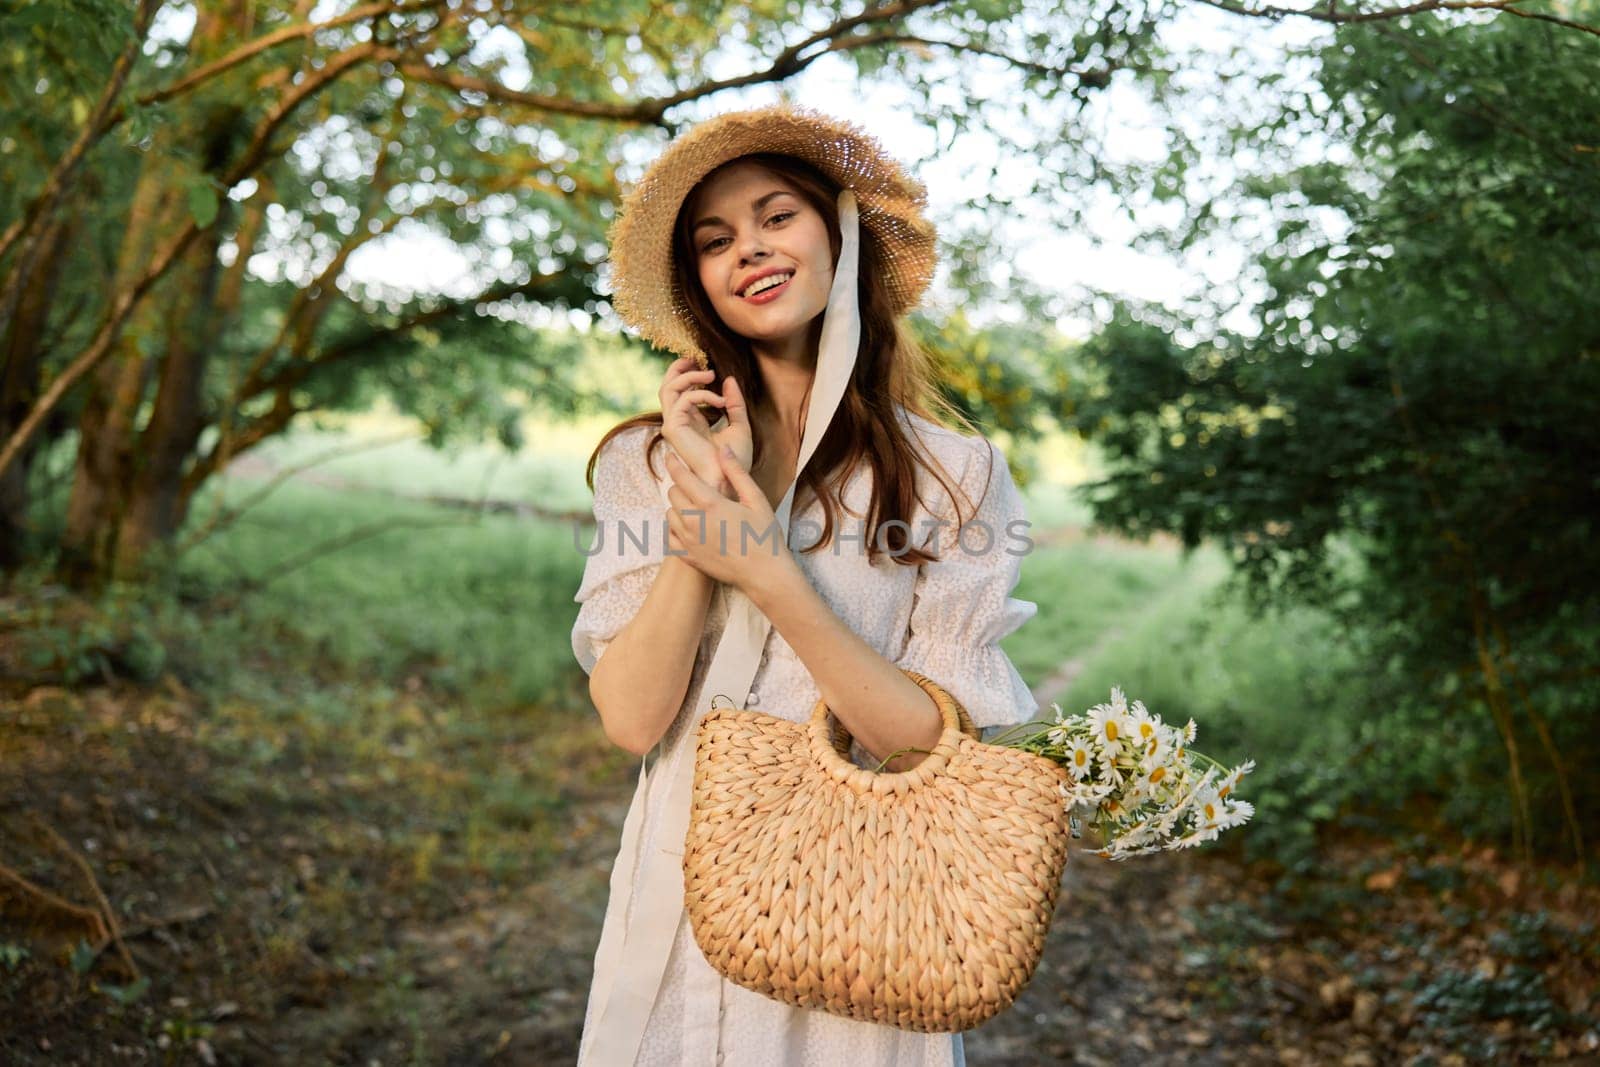 happy, smiling woman in a wicker hat with a basket of daisies in her hands walks through the forest by Vichizh